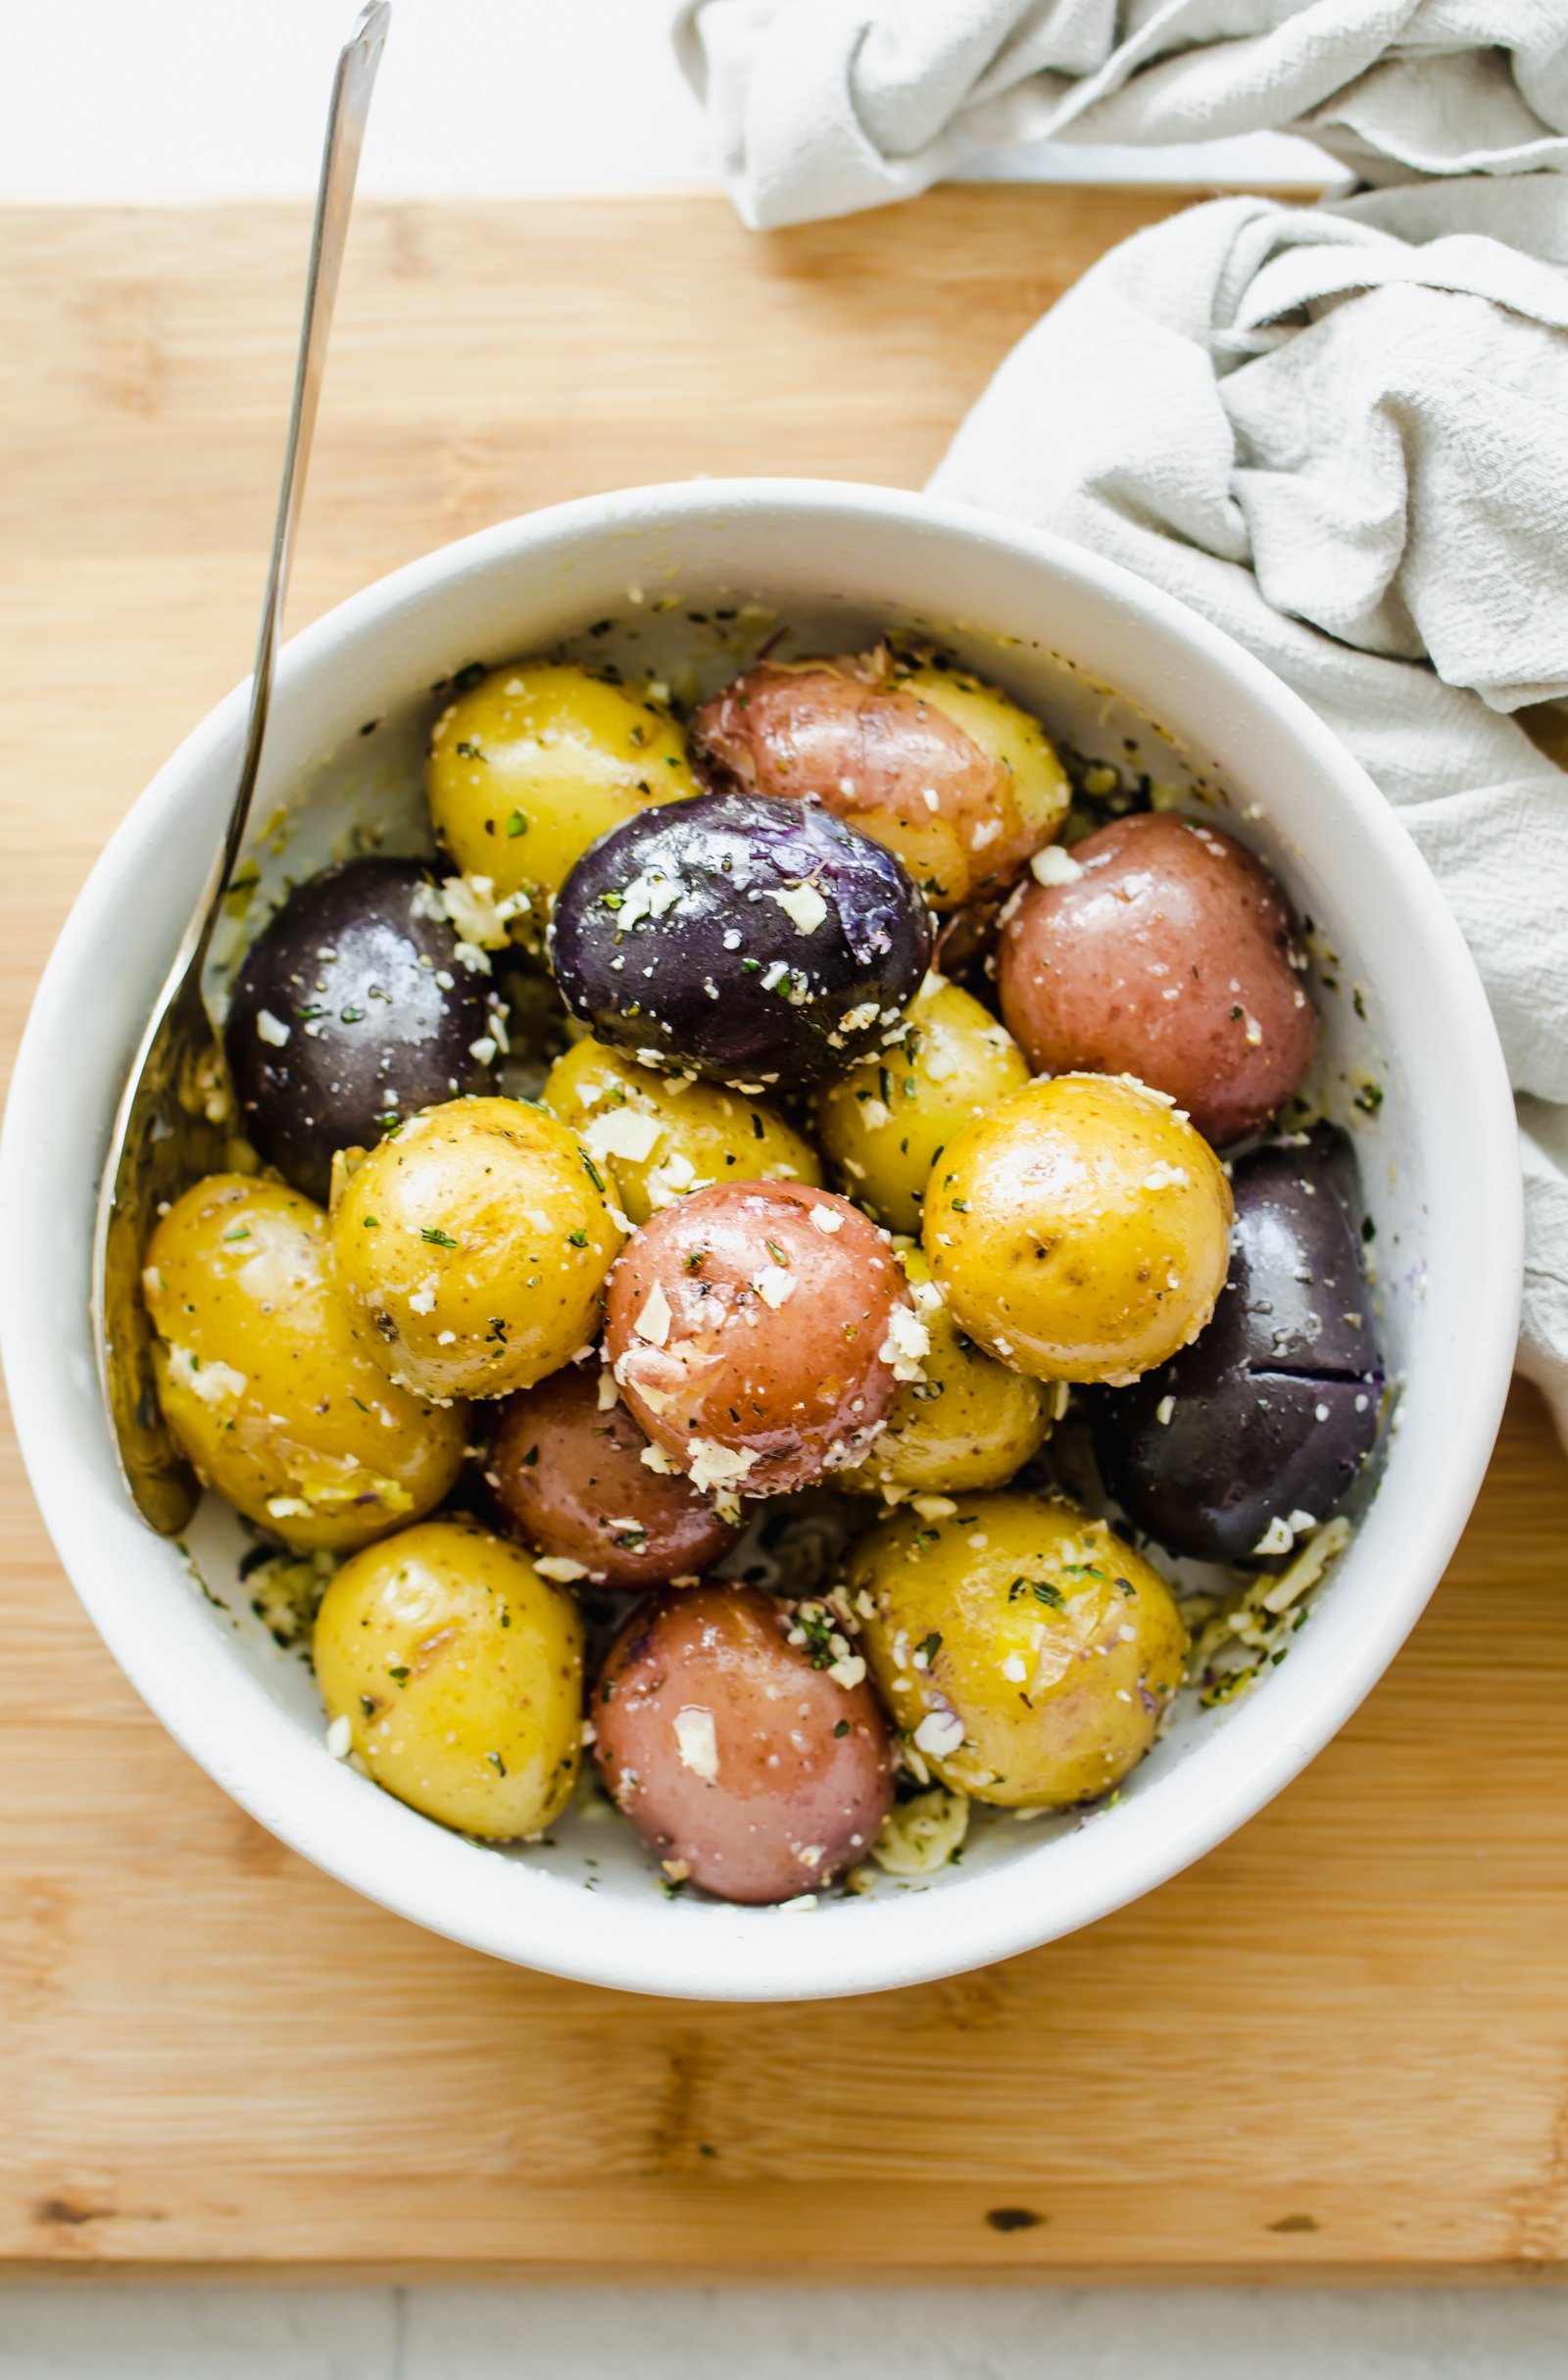 Boiled red, blue, and yellow baby potatoes in a white bowl with Parmesan and chopped fresh parsley.